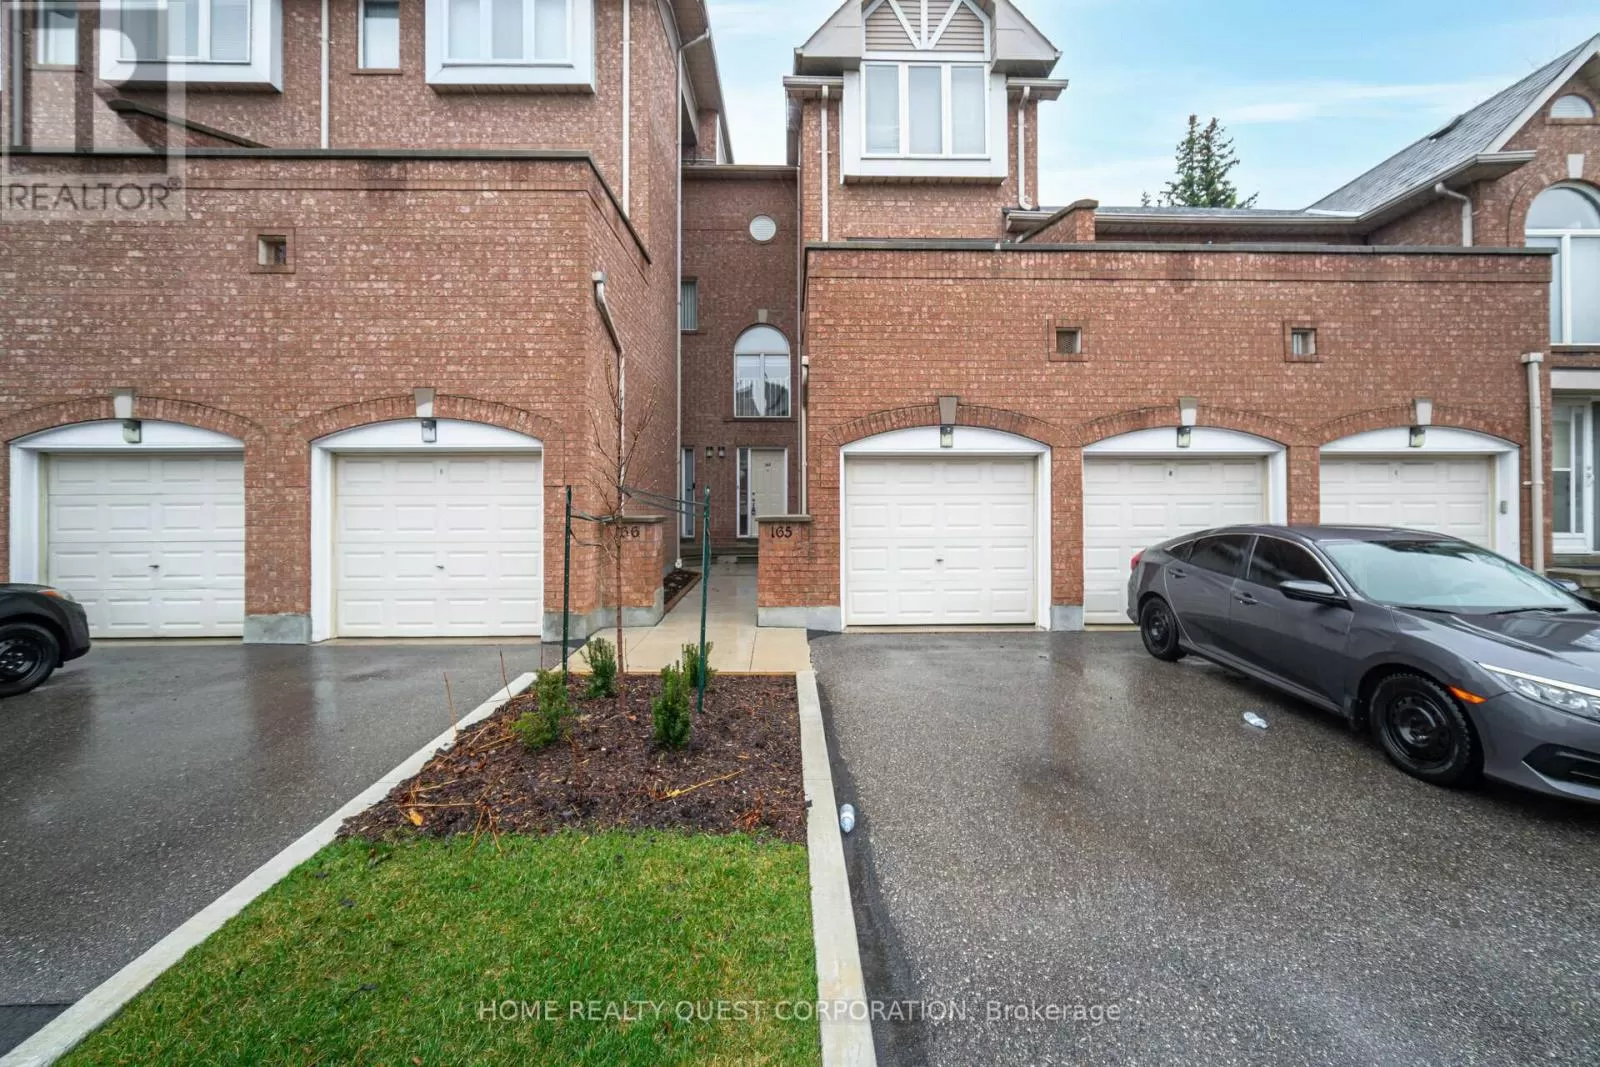 Row / Townhouse for rent: 165 - 99 Bristol Road E, Mississauga, Ontario L4Z 3P4